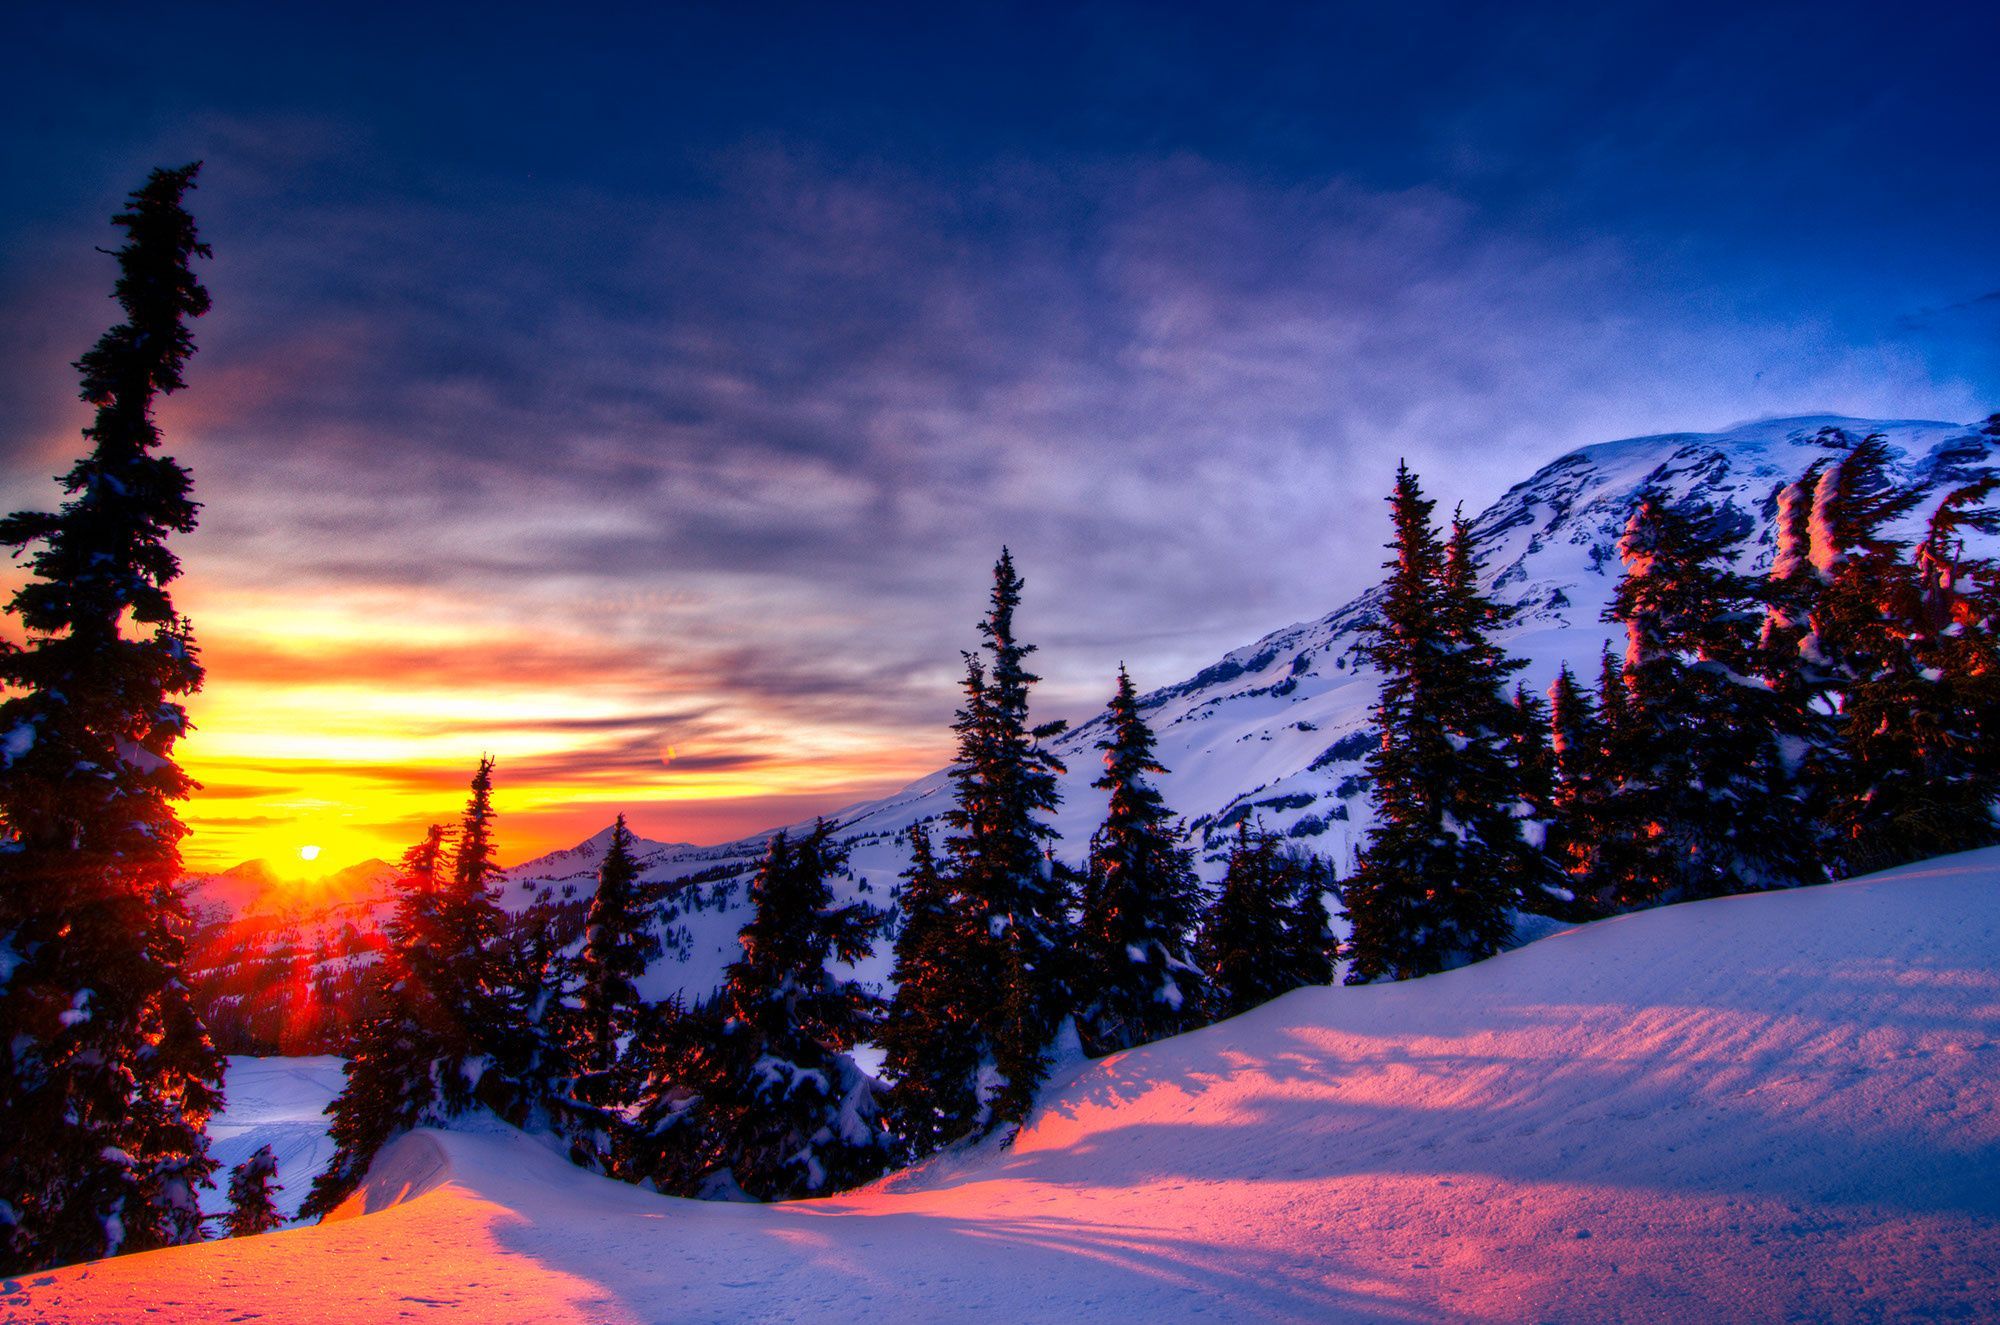 Sunset Winter Mountain Landscapes